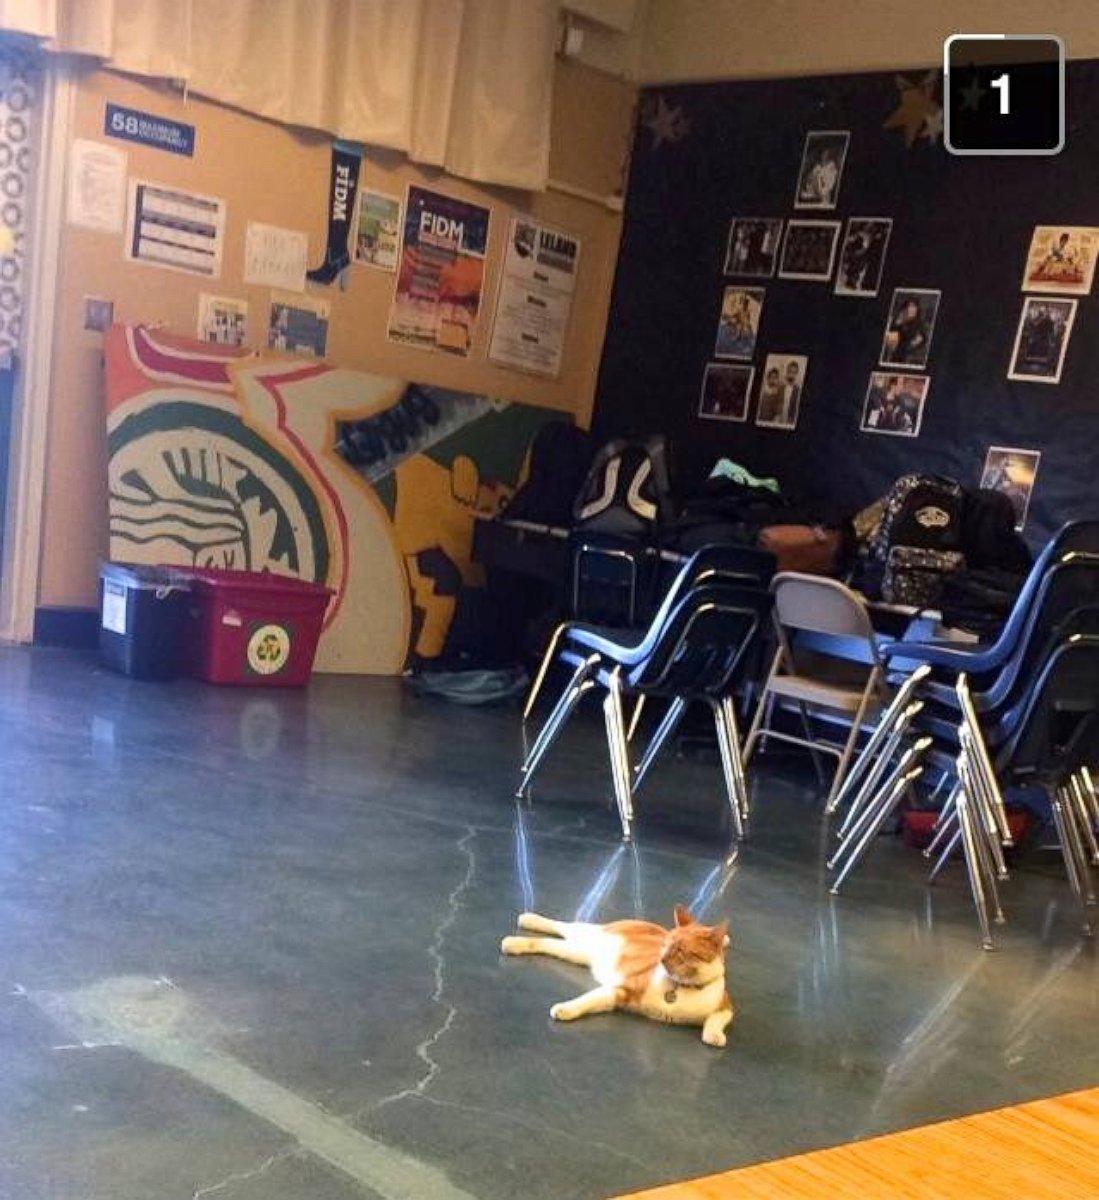 PHOTO: Bubba the cat is a well-known figure at Leland High School and Bret Harte Middle School in San Jose, California.